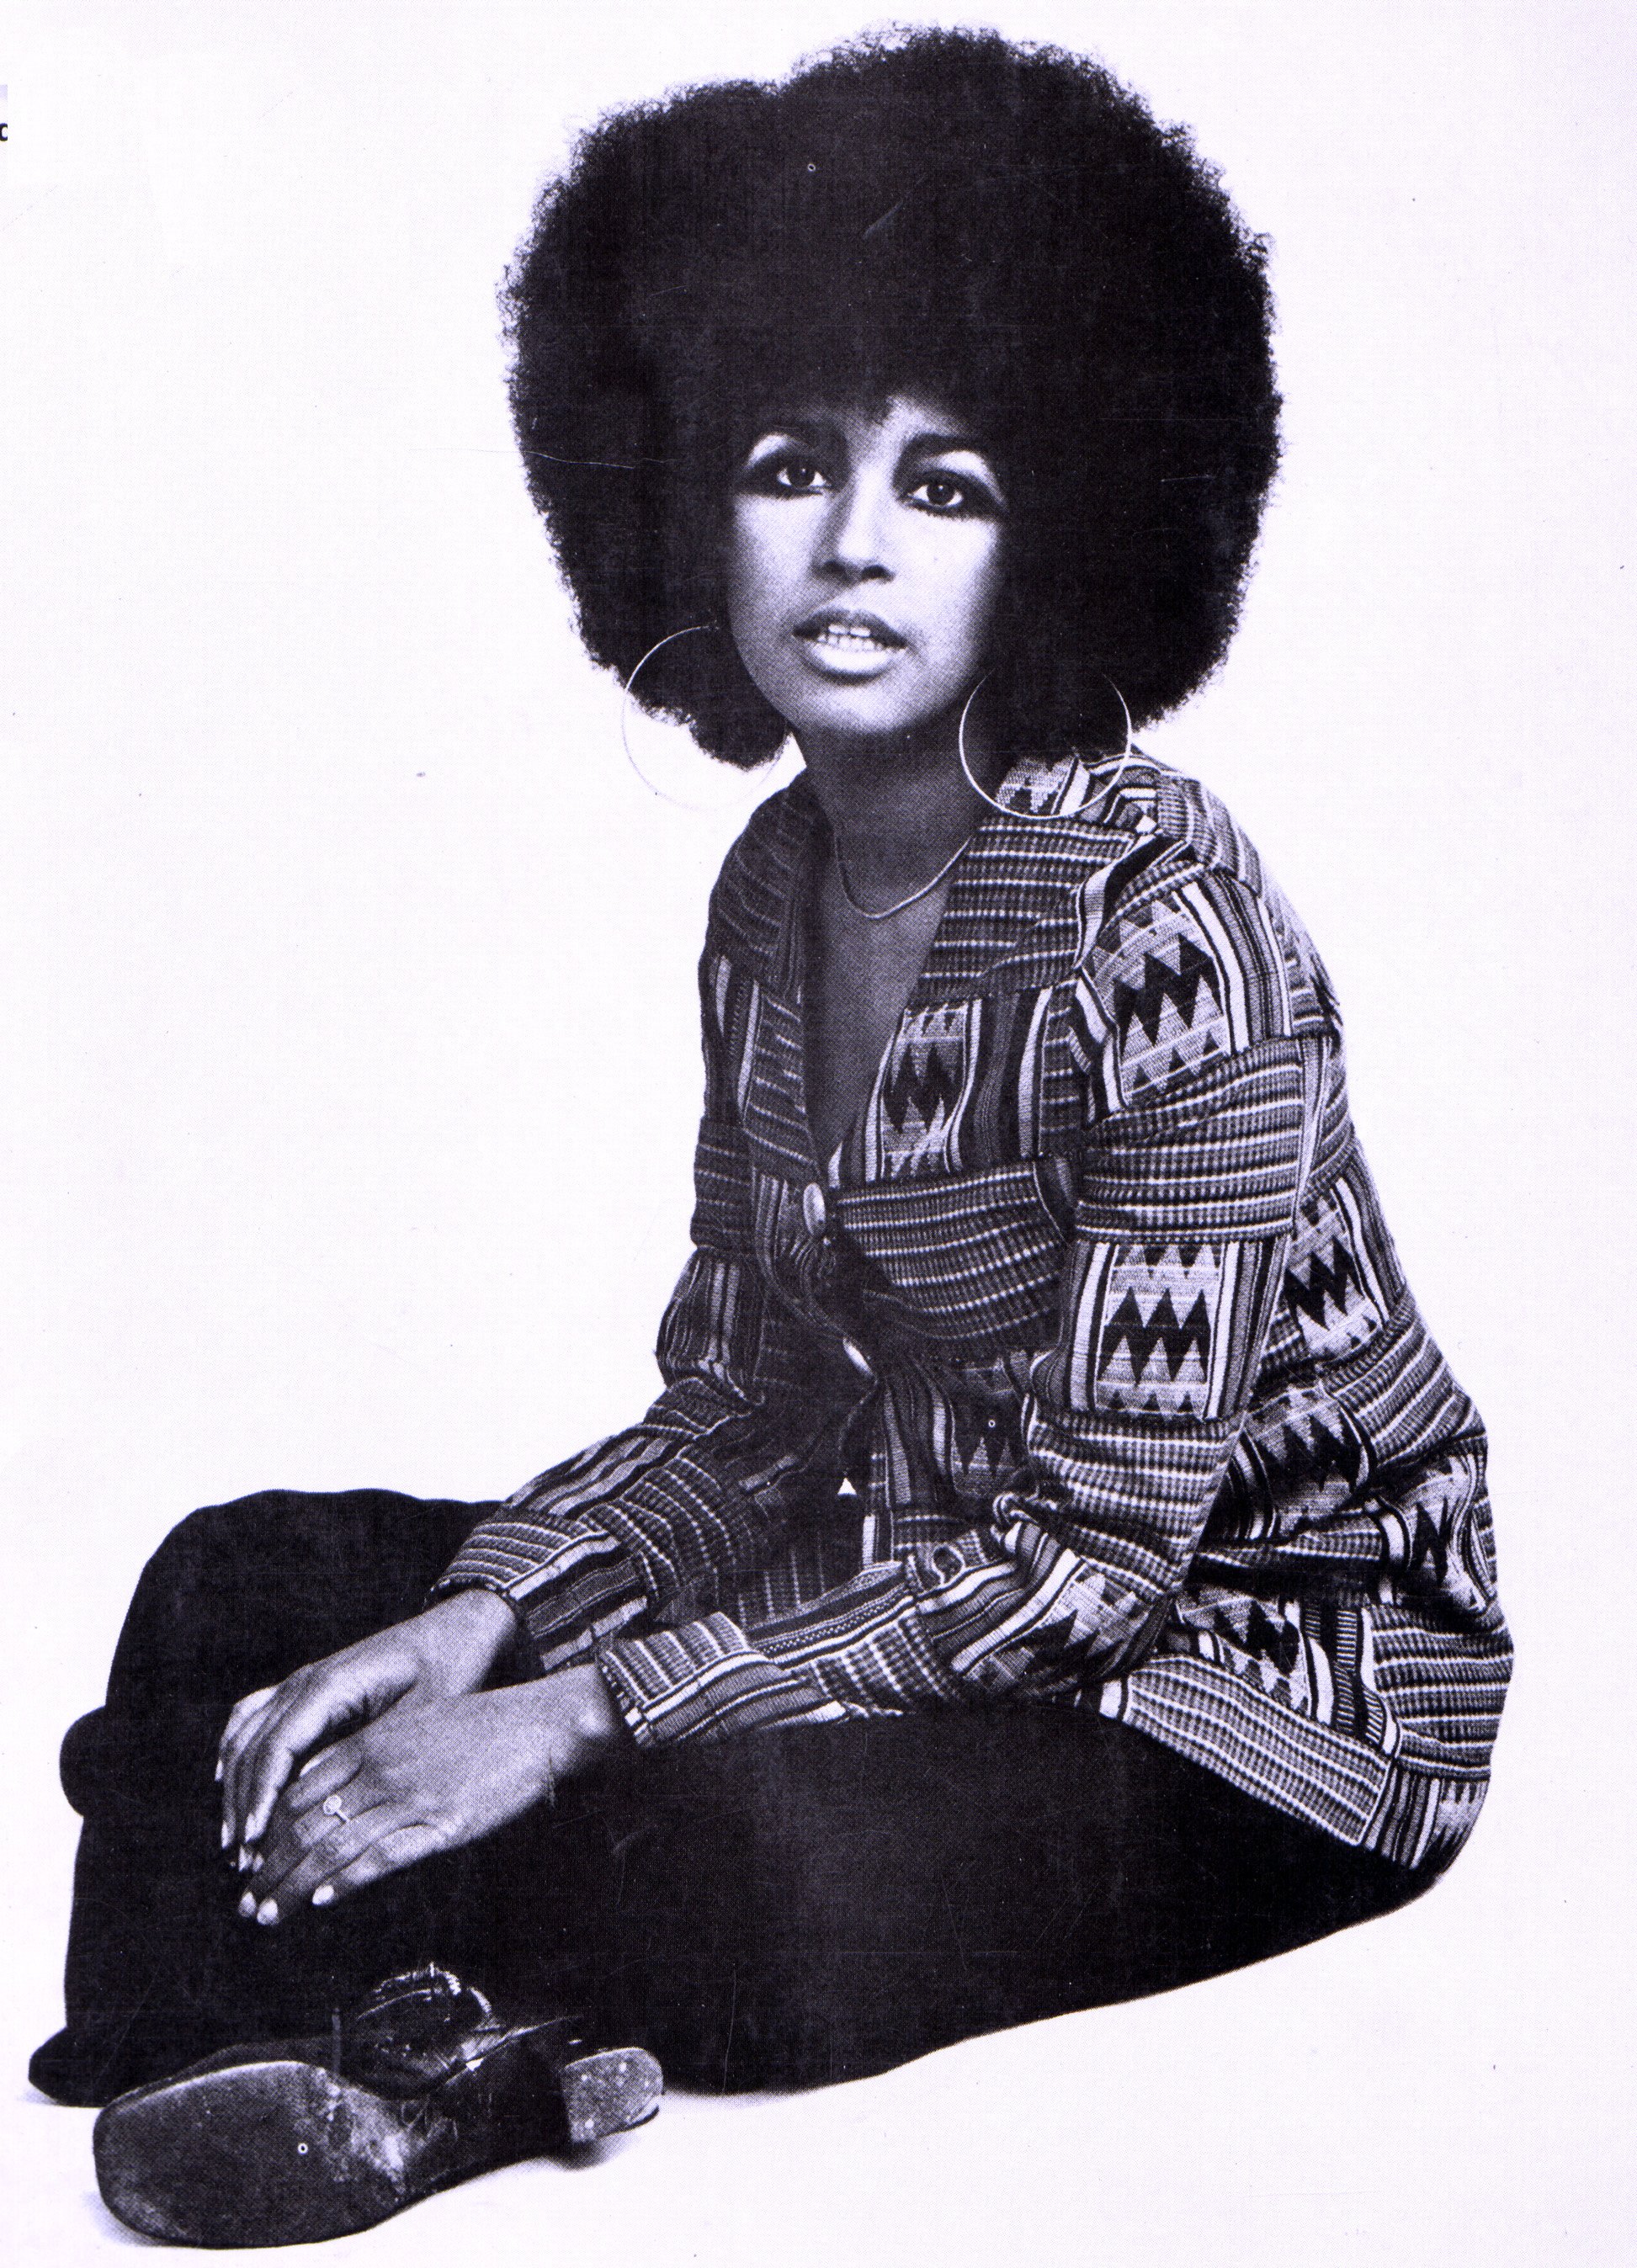 Novelist and biographer Marsha Hunt photographed while sitting with her legs crossed in 1970. / Source: Getty Images